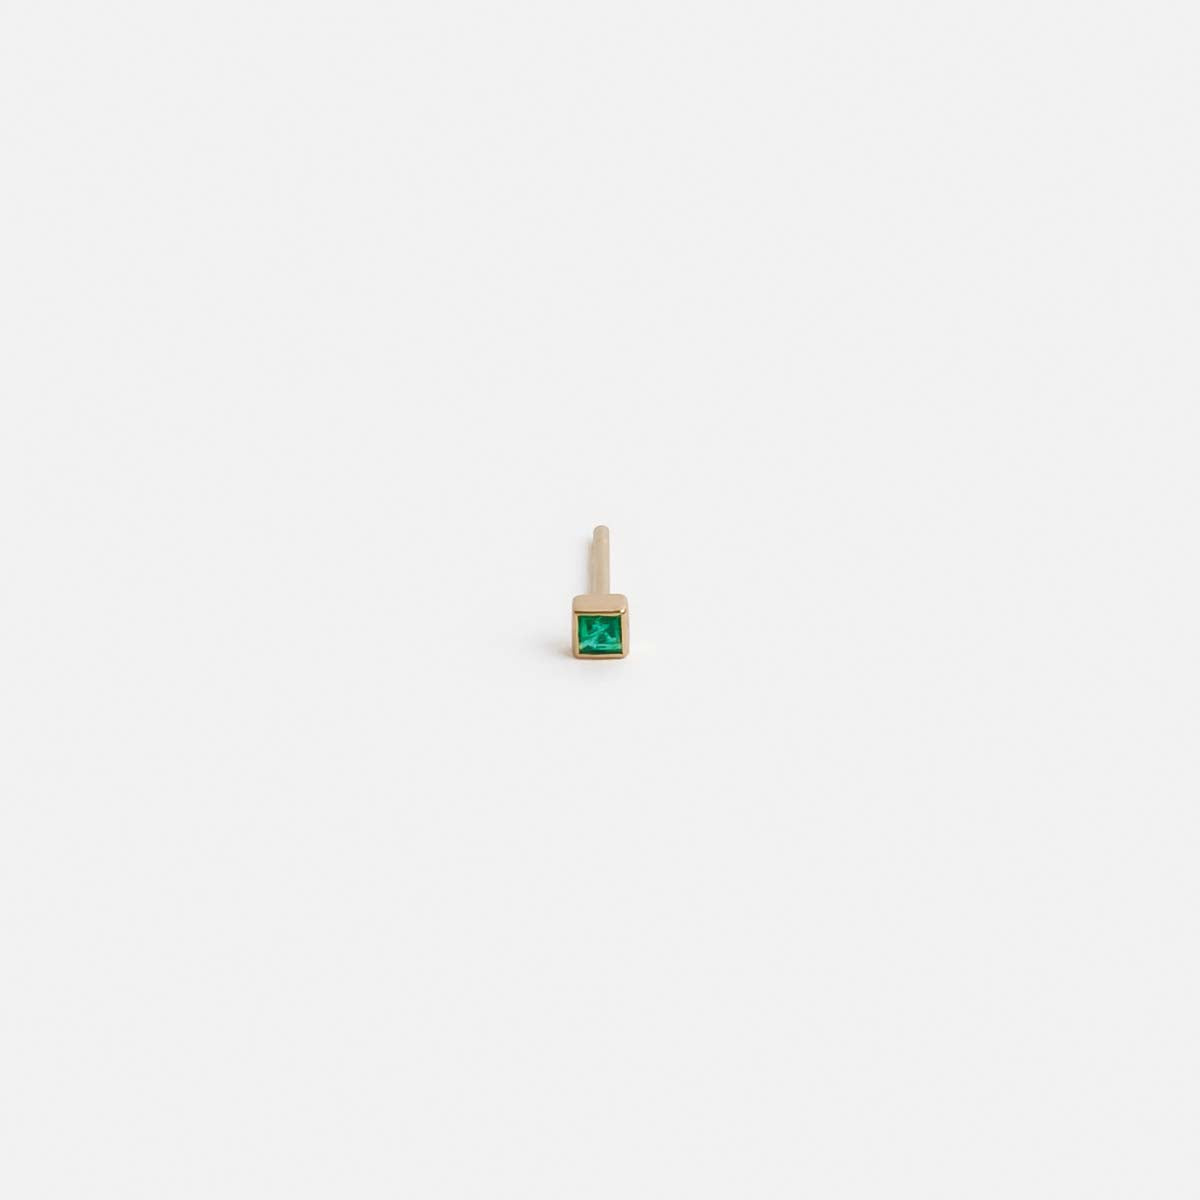 Small Plain Ona Bar Stud in 14k Gold set with Emerald By SHW Fine Jewelry NYC